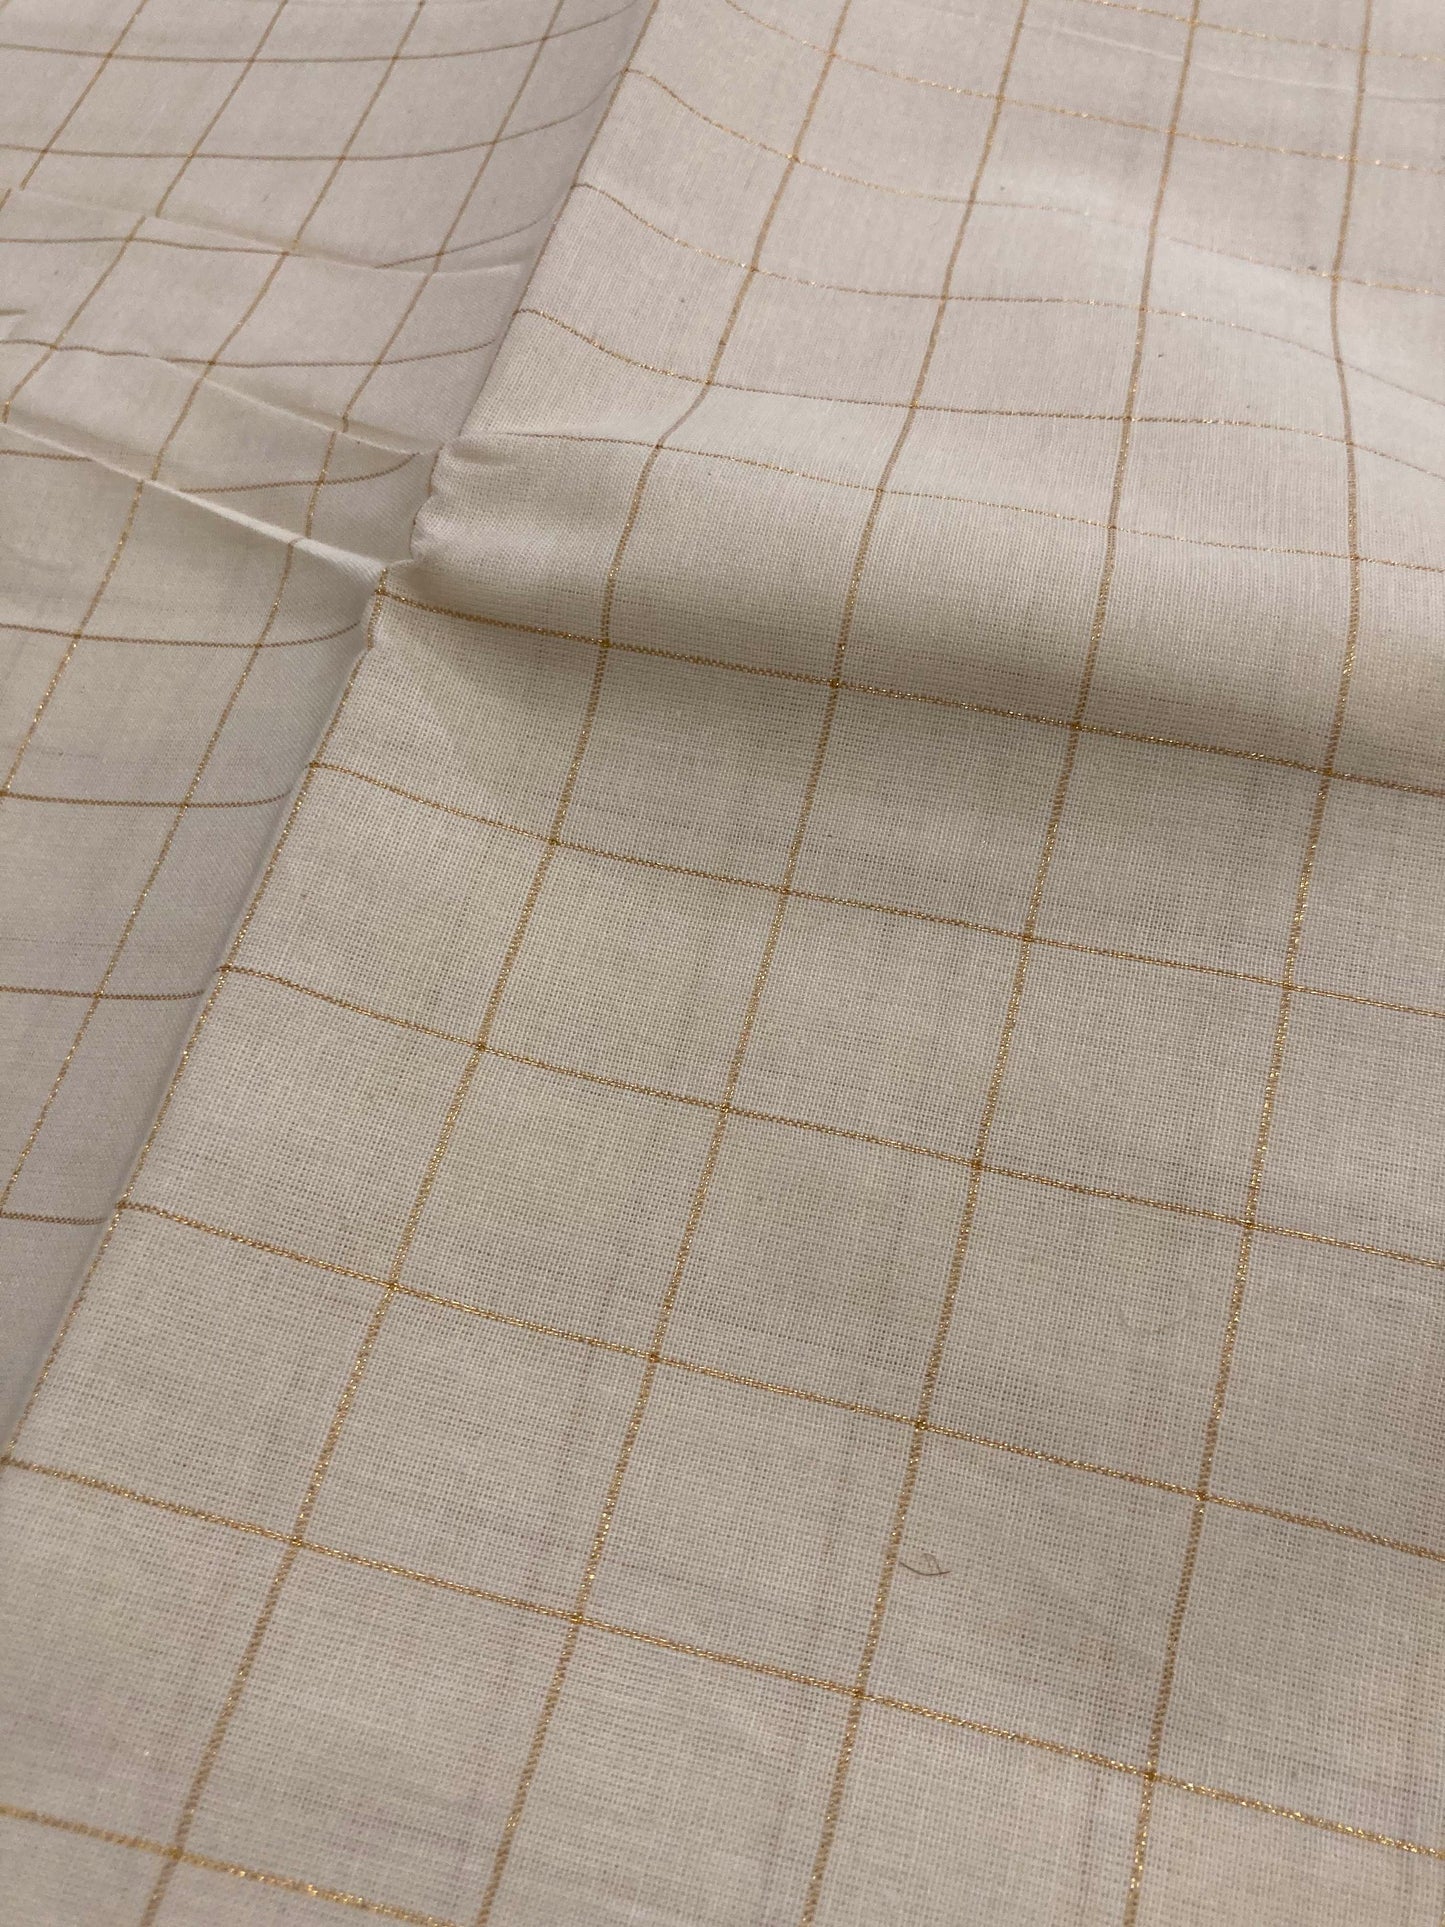 Kerala Cotton Material with Kasavu Border with Check Woven Design (4 meters)